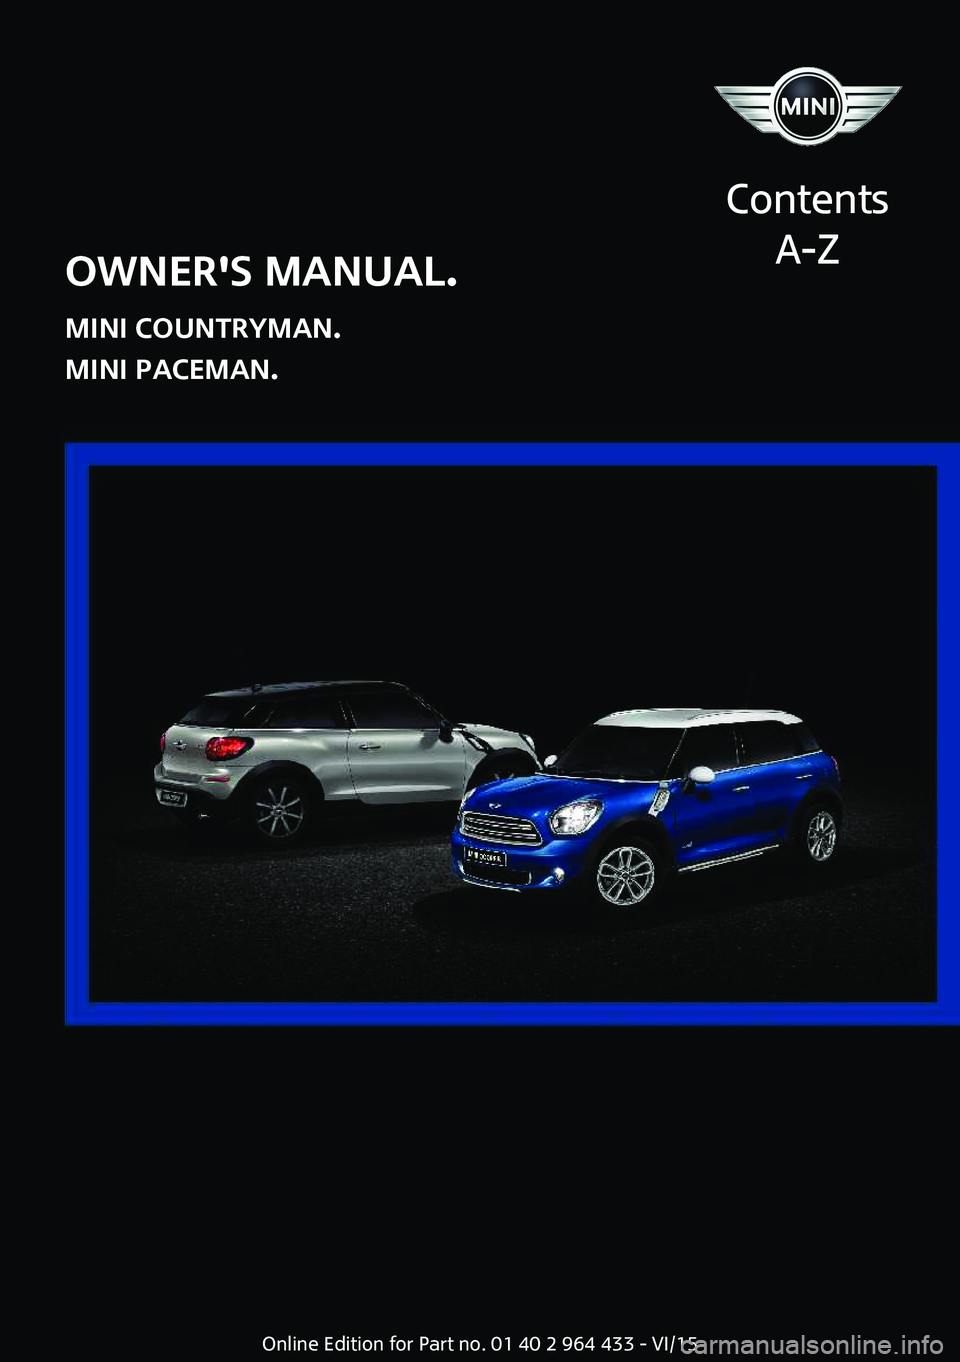 MINI COUNTRYMAN PACEMAN 2016  Owners Manual OWNER'S MANUAL.
MINI COUNTRYMAN.
MINI PACEMAN.
Contents
A-ZOnline Edition for Part no. 01 40 2 964 433 - VI/15  